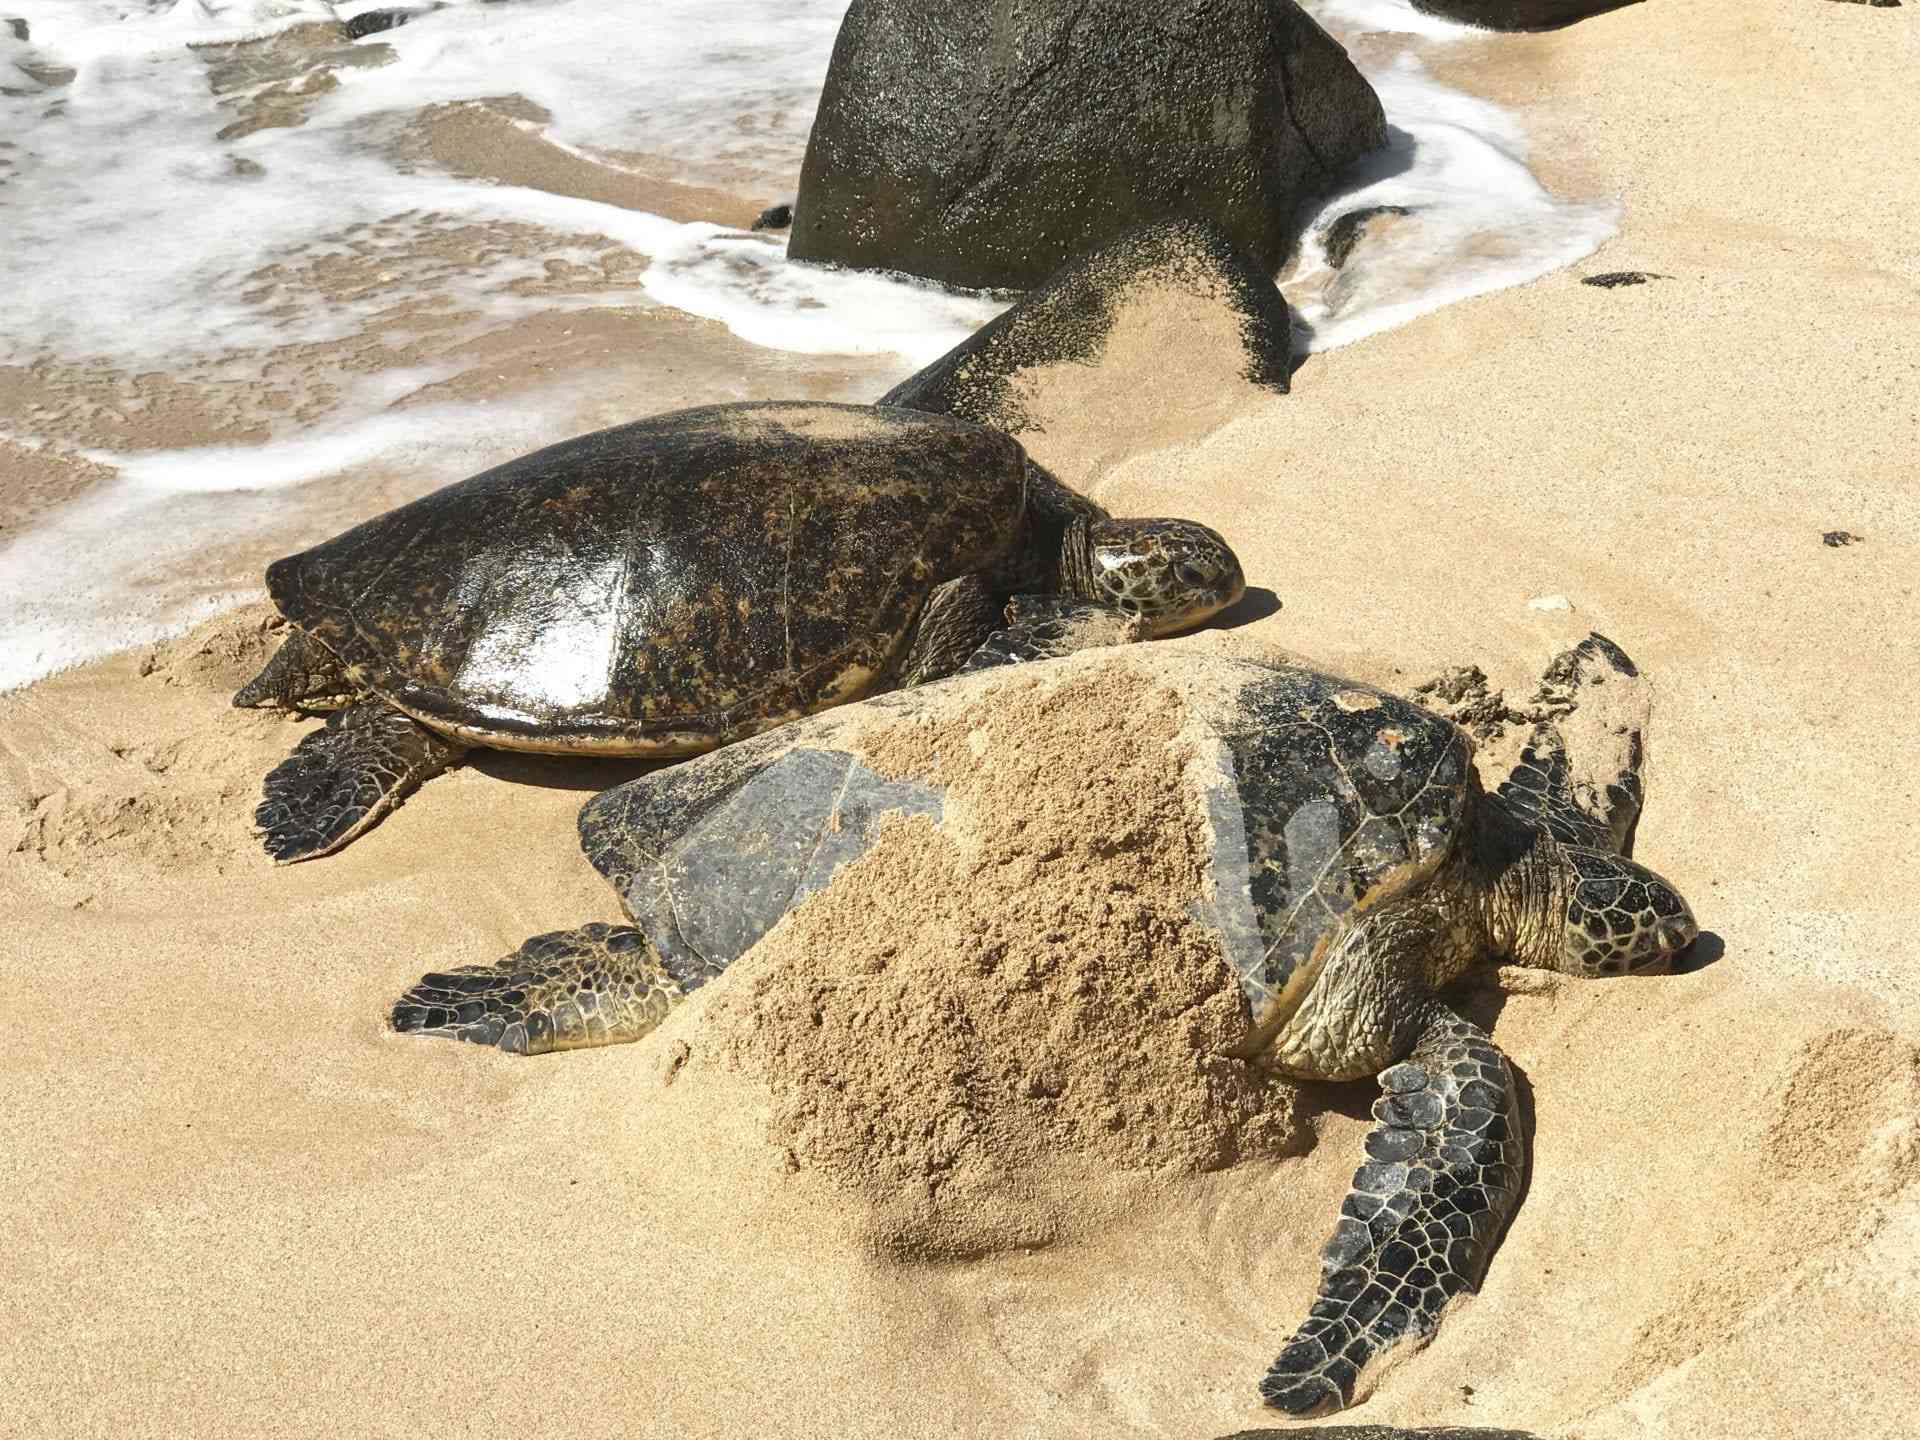 two turtles on shore